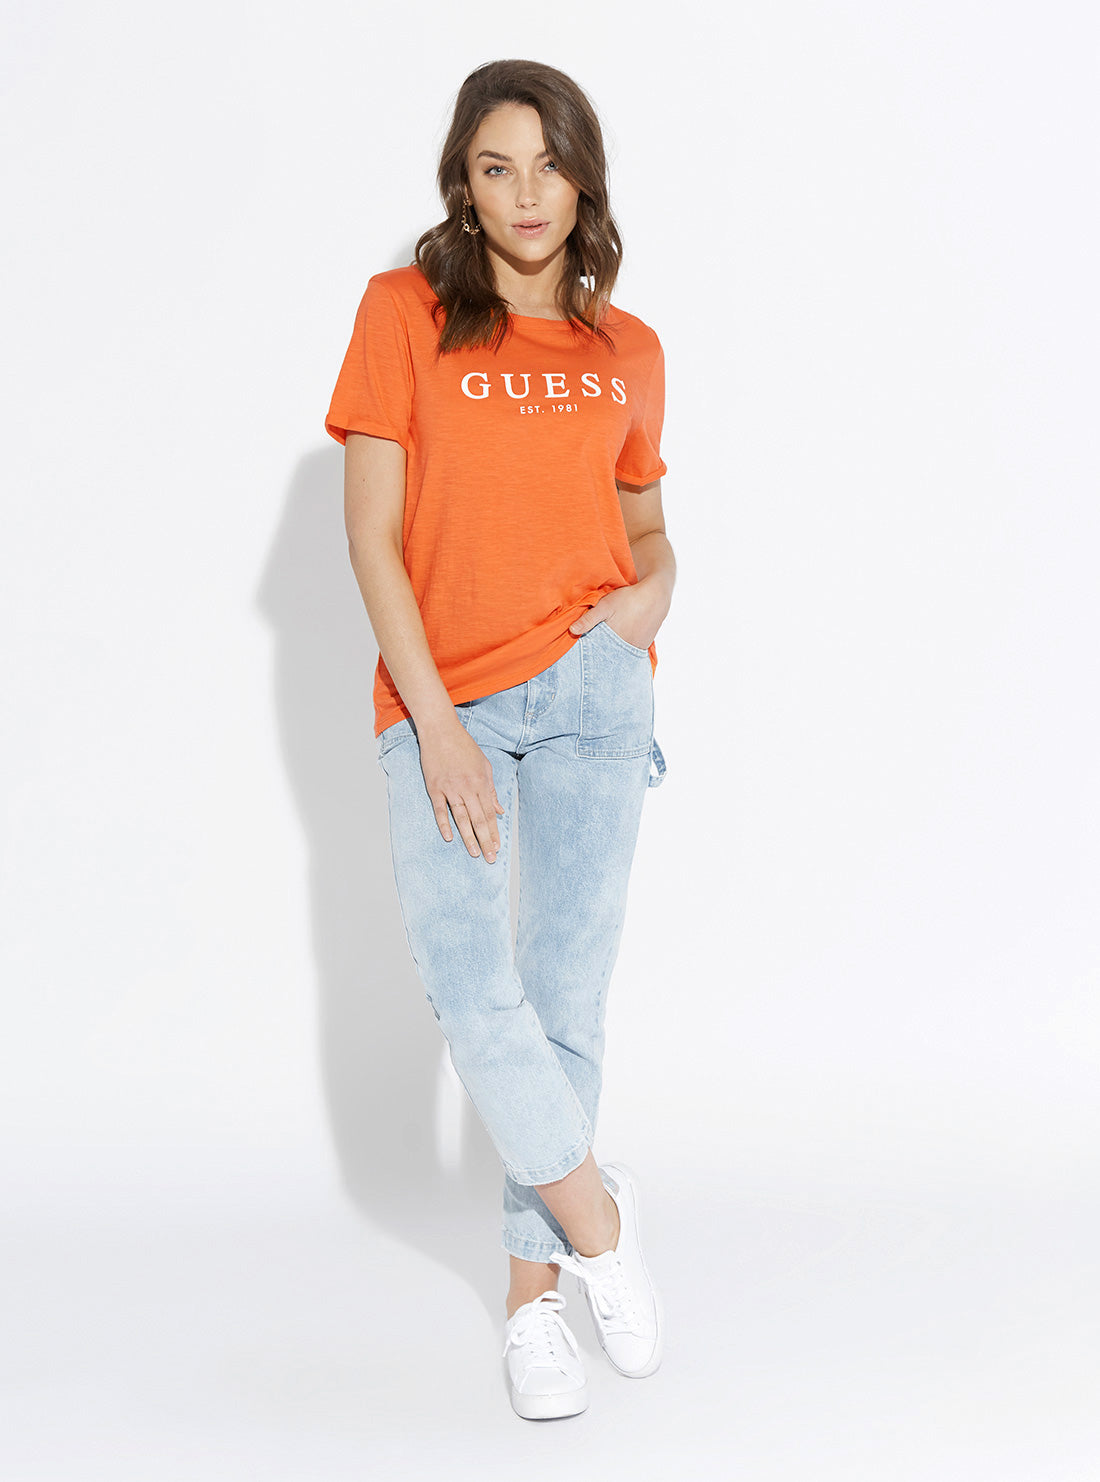 GUESS Womens Eco Orange Short Sleeve GUESS 1981 Rolled Cuff T-Shirt W0GI69R8G01 Full View